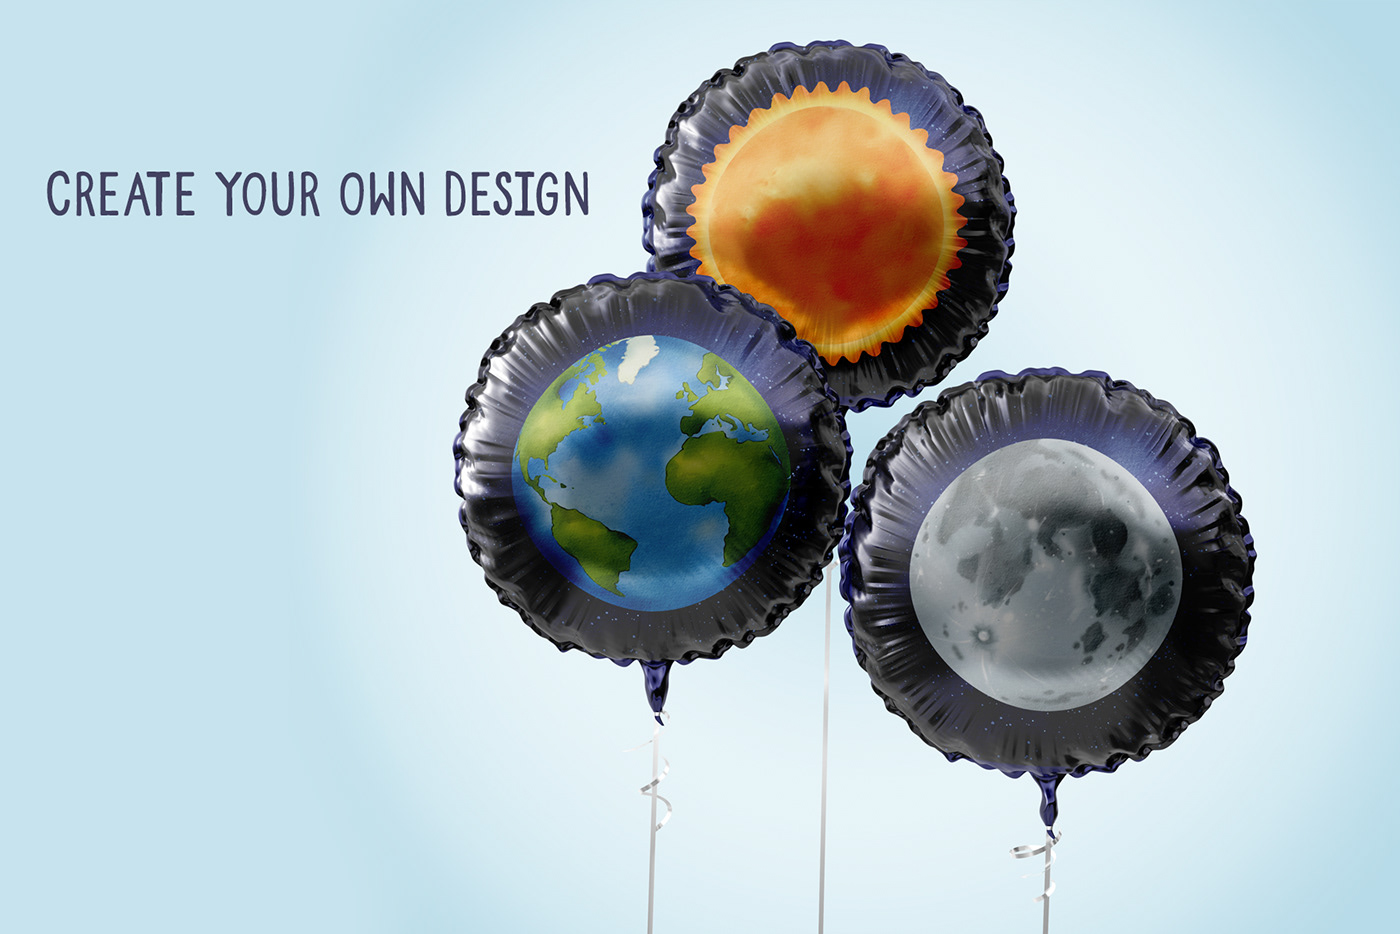 Utilizing space-themed illustrations for decorating inflatable balloons